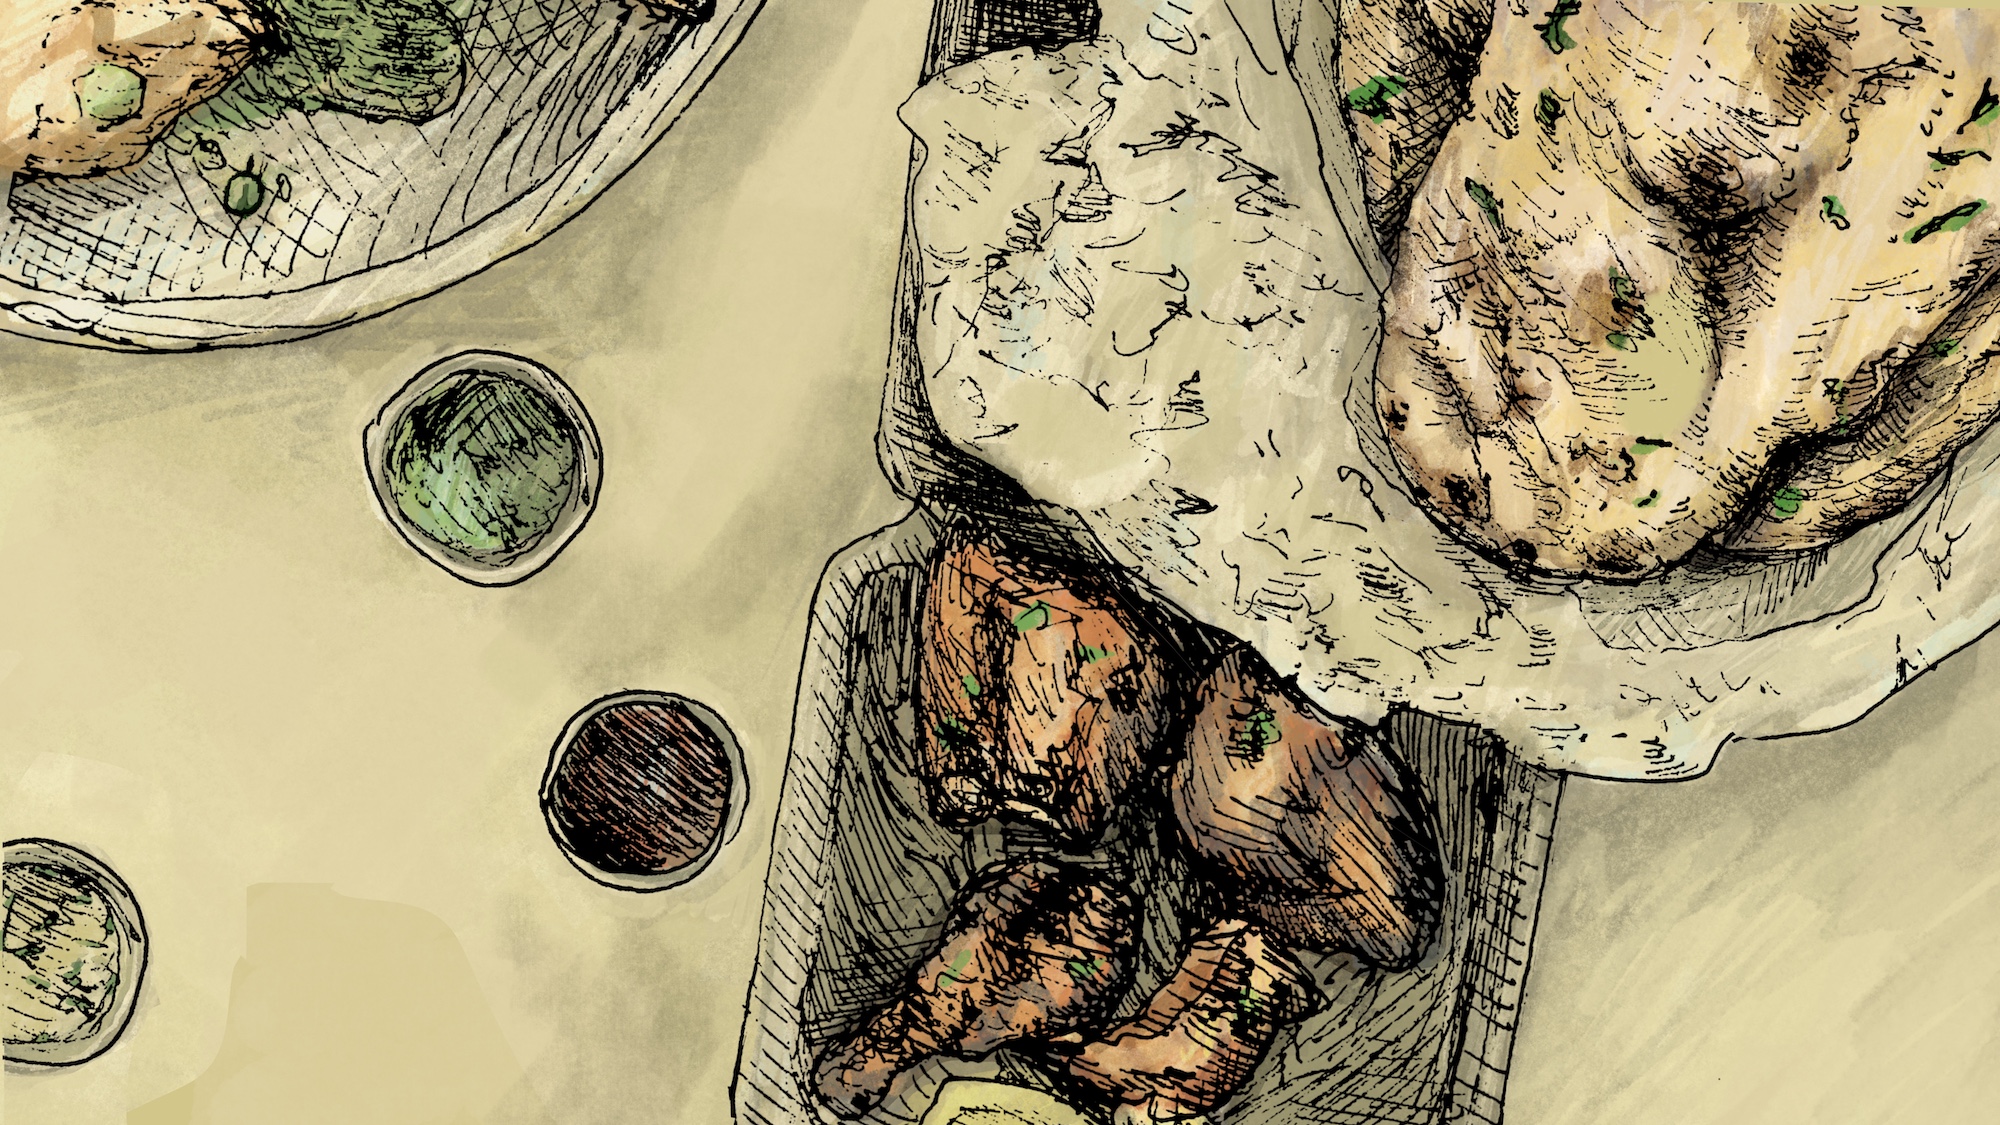 An illustration of food, like naan and chicken wings, in take-out boxes.